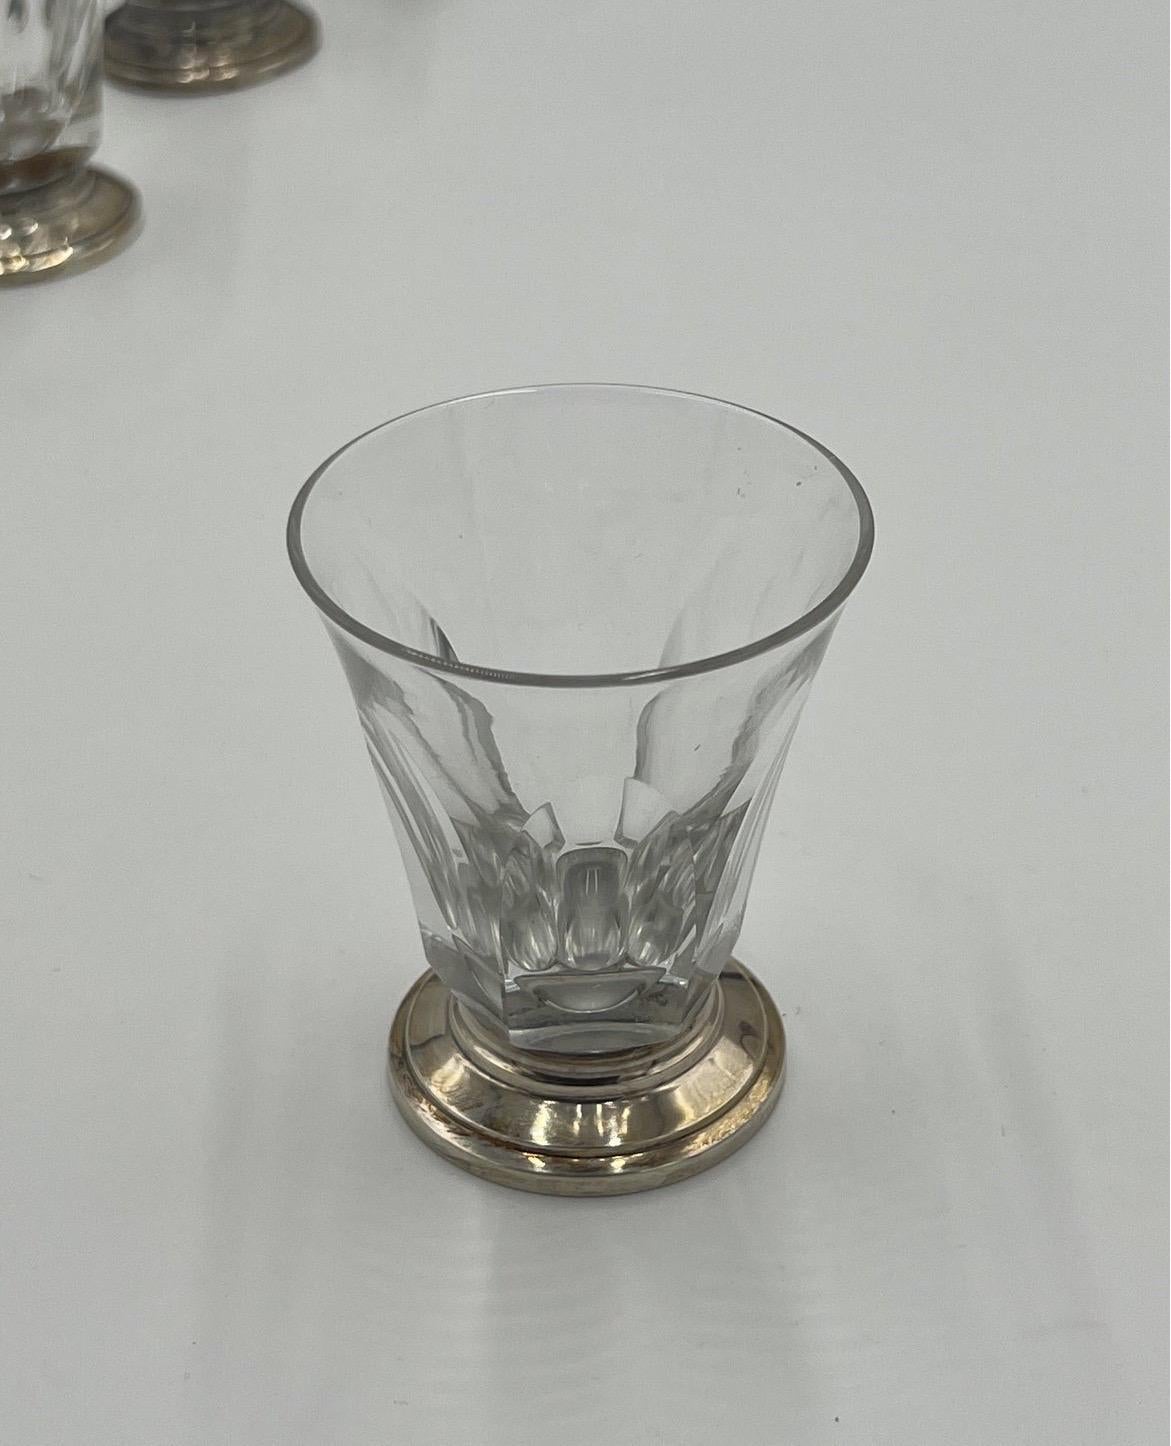 Set of 10 E Caldwell sterling silver and crystal vodka or cocktail glasses with 950 mounts. Fully French hallmarked. Excellent glasses with no damage! Measure: 3”.